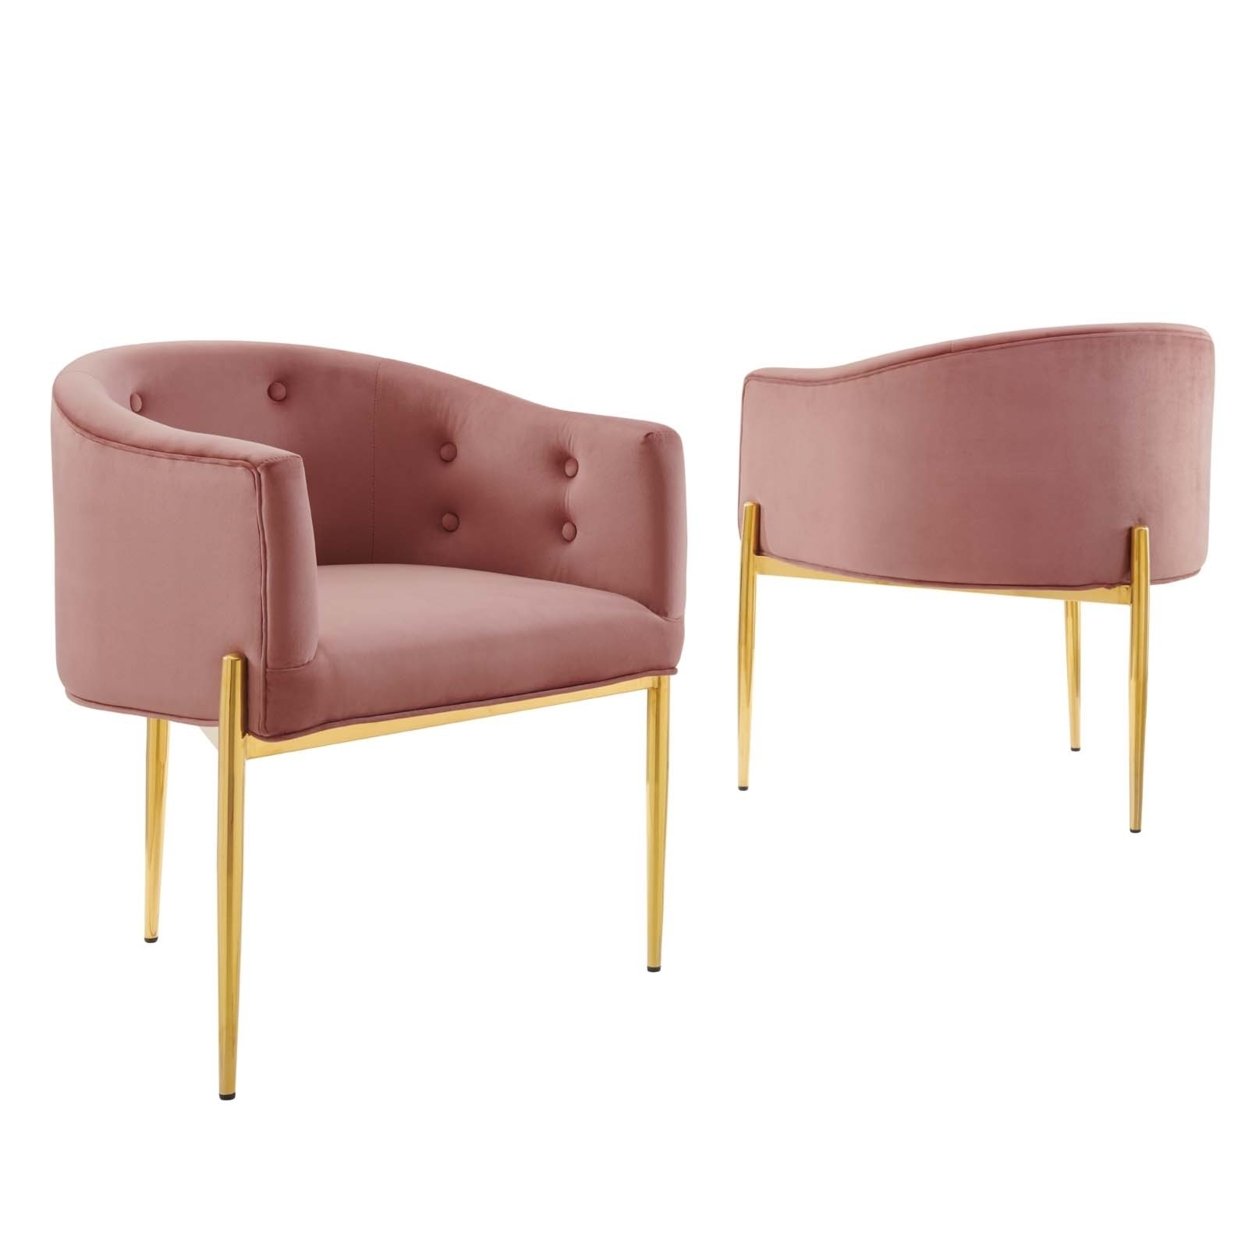 Savour Tufted Performance Velvet Accent Chairs - Set Of 2, Dusty Rose